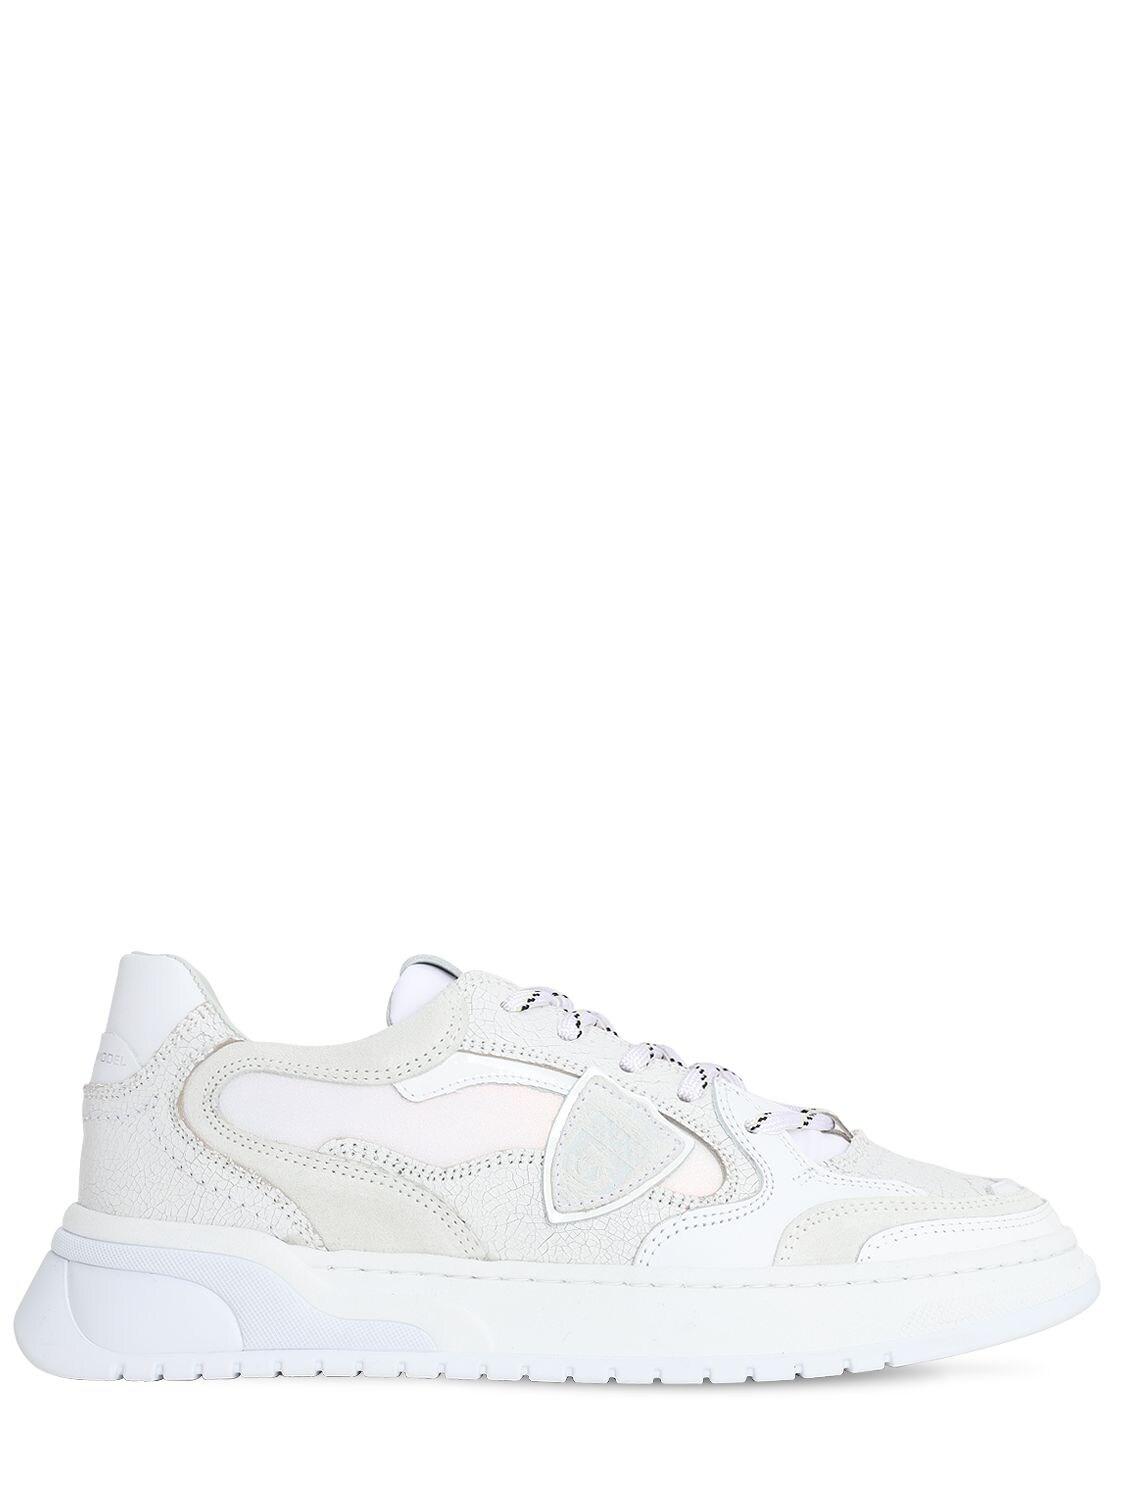 Philippe Model Saint Denis Leather Sneakers in White - Lyst